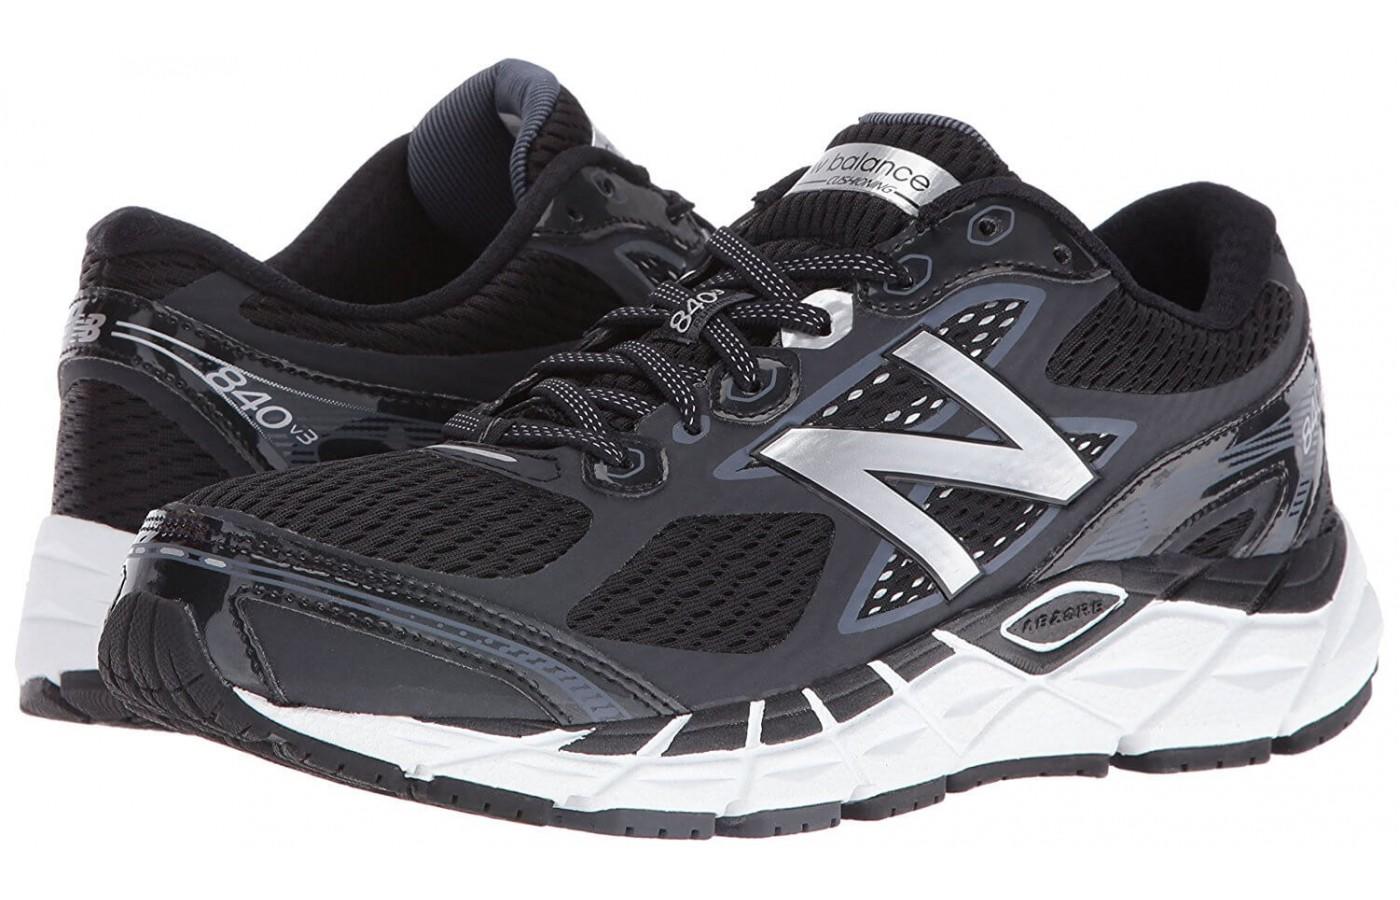 The New Balance 840 v3 is a comfortable shoe especially for those with foot pain